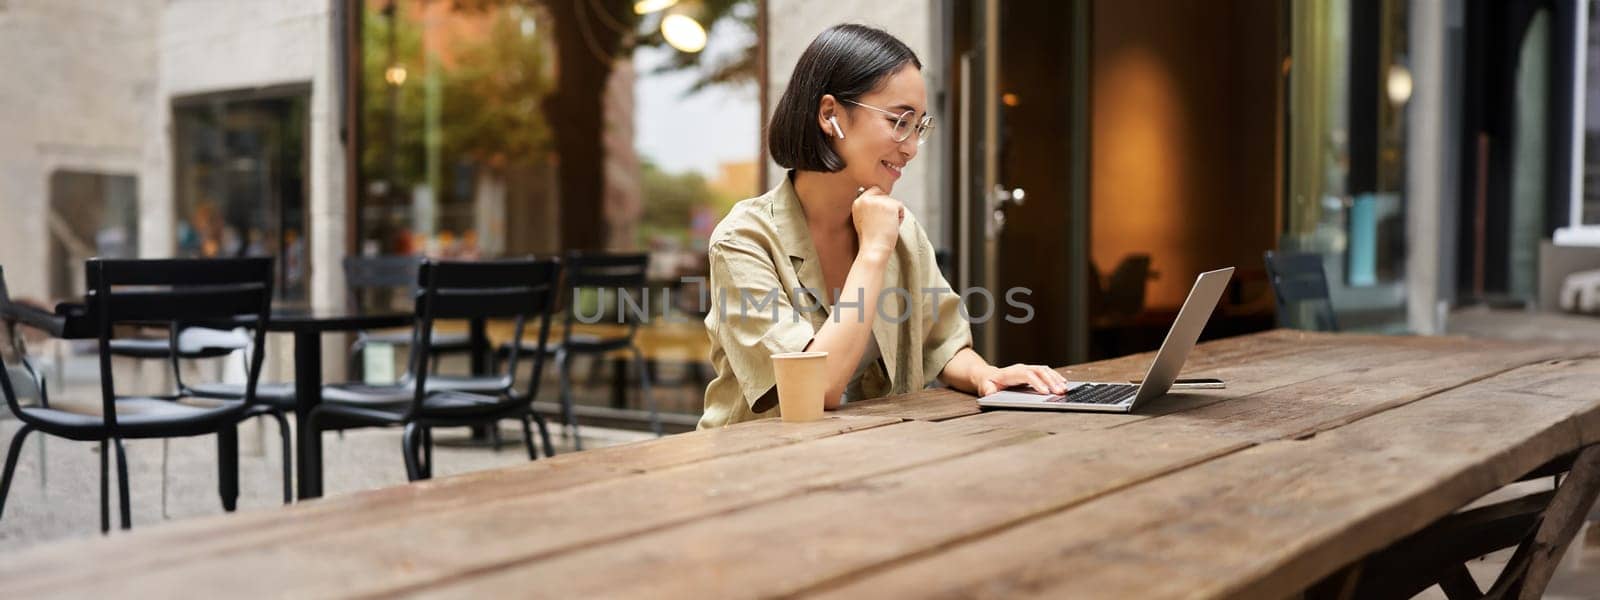 Silhouette of young woman working in cafe with laptop, typing on keyboard and drinking coffee, sitting outside.